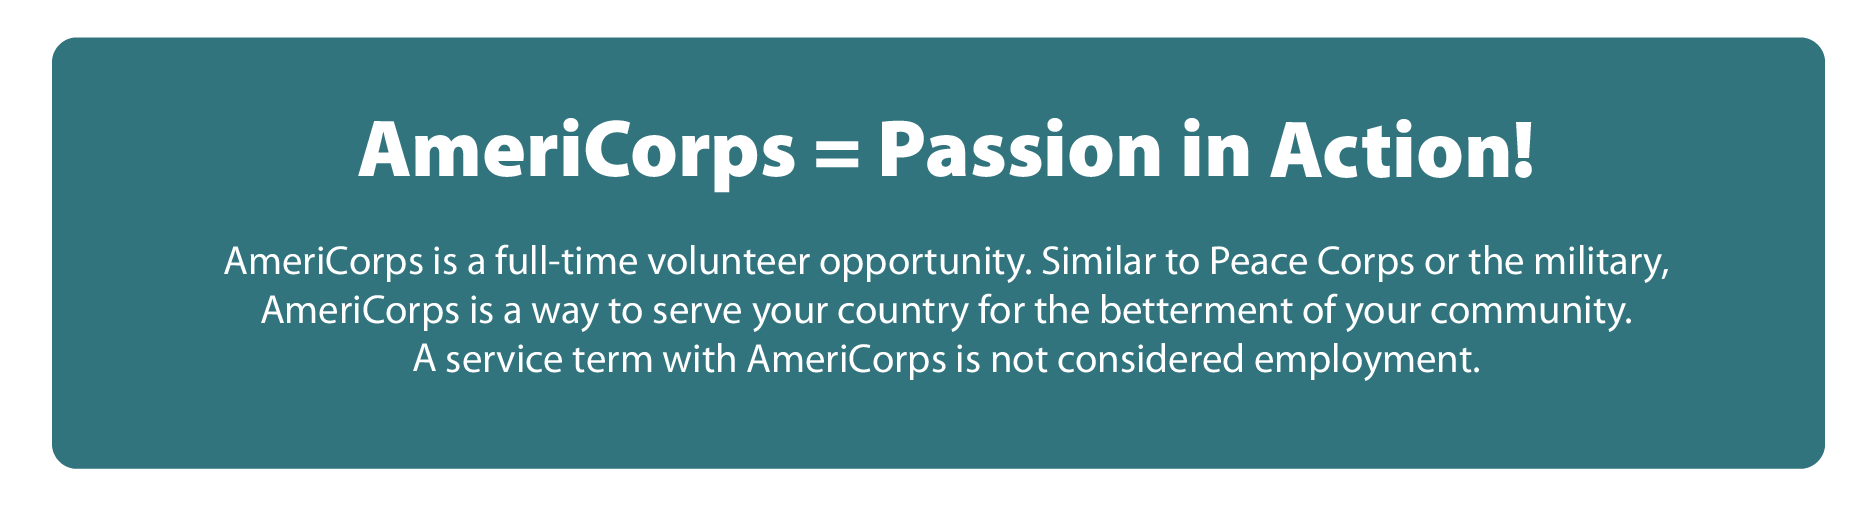 AmeriCorps Passion in Action